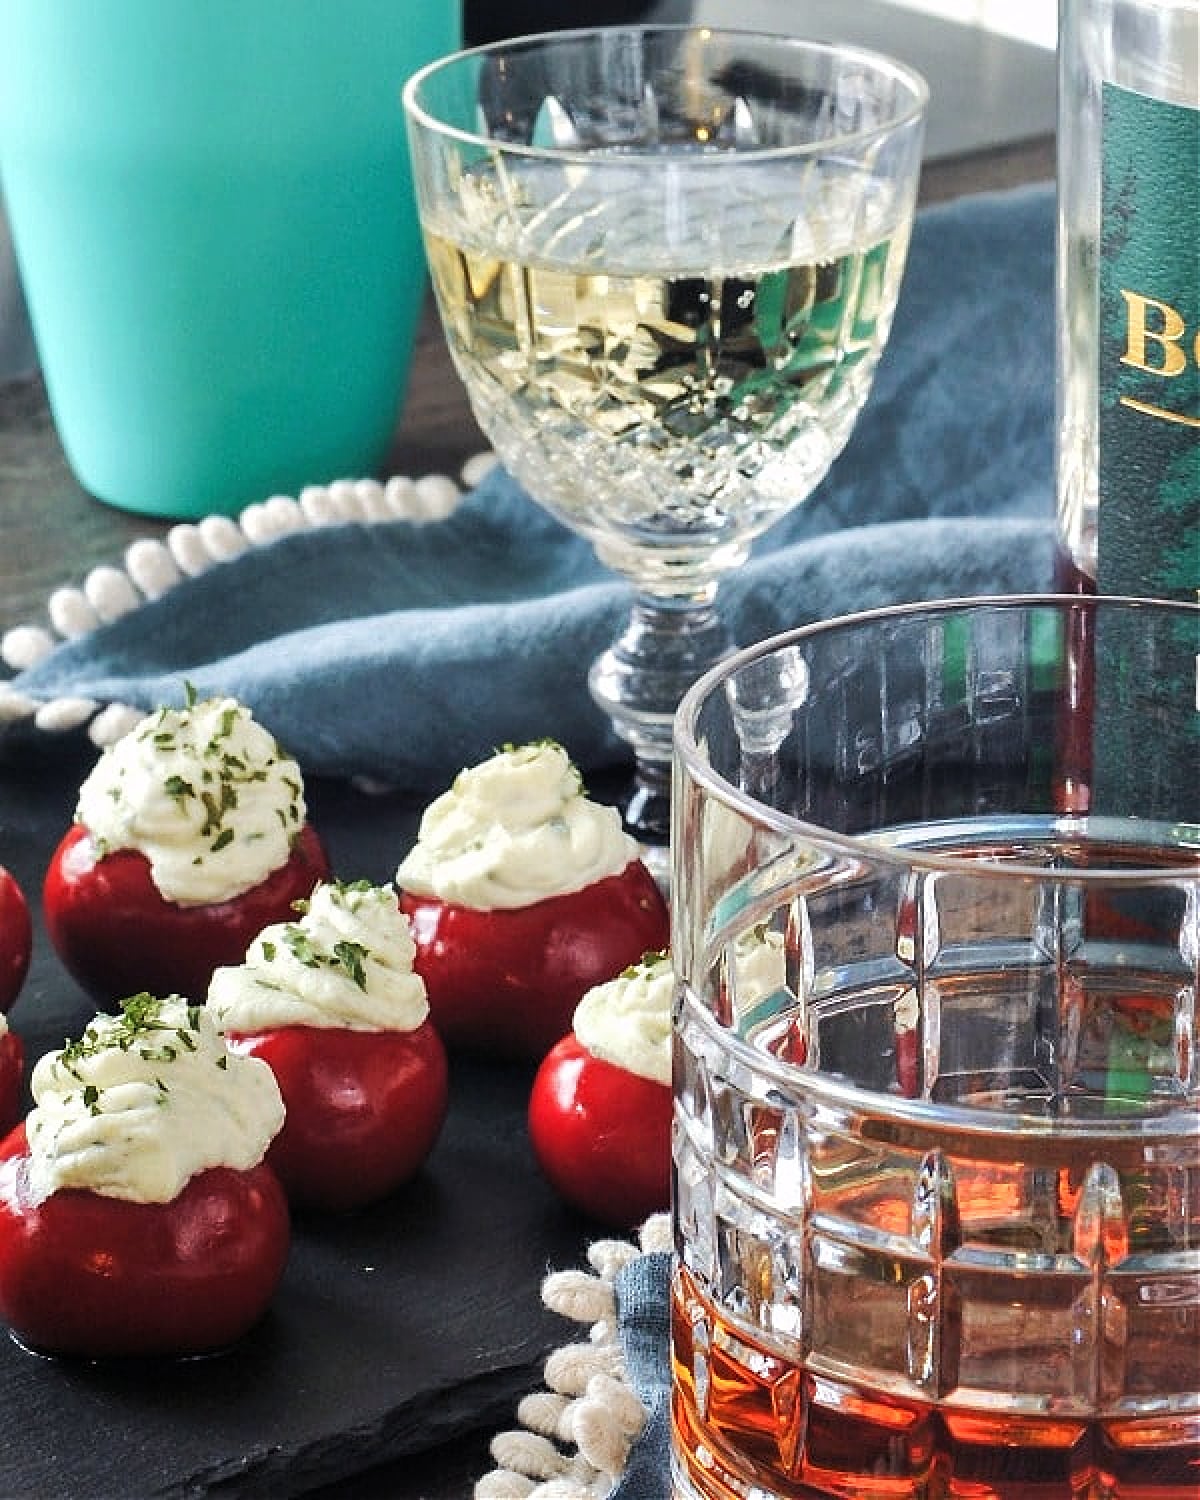 Round red peppadew sweet peppers filled with herb cheese (Boursin style) on a black slate board next to a crystal champagne glass and a rocks glass with bourbon.